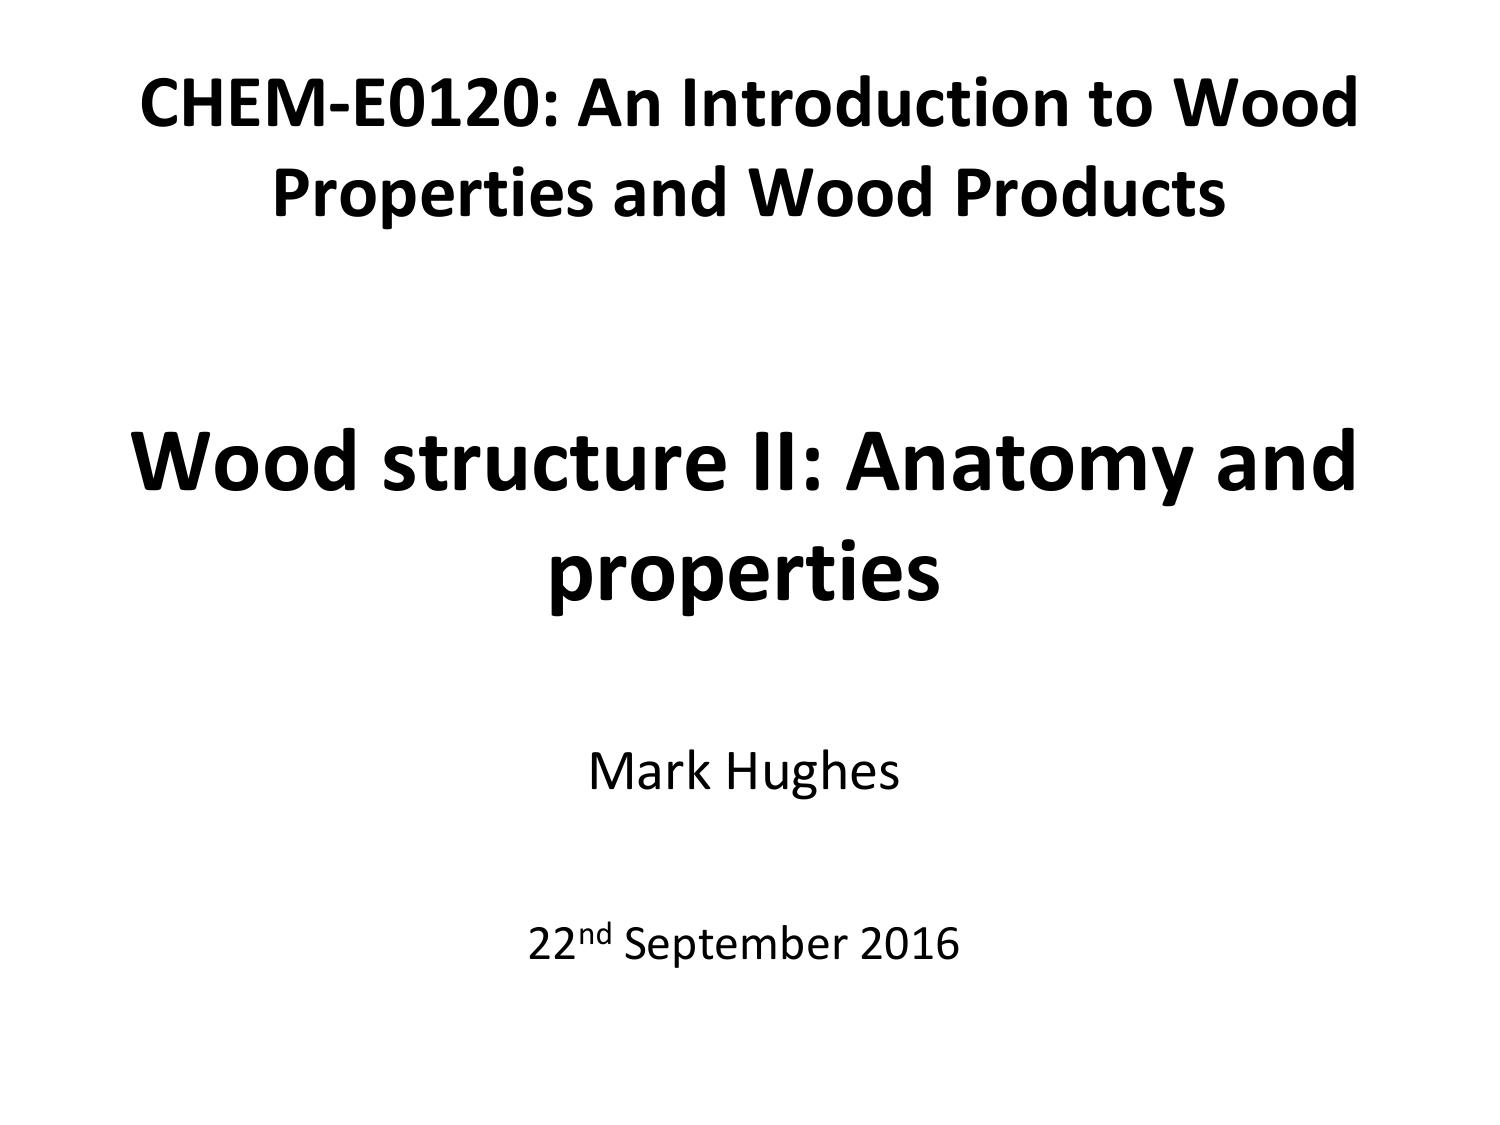 Introduction to Wood Properties and Wood Products  Puu-25.5000